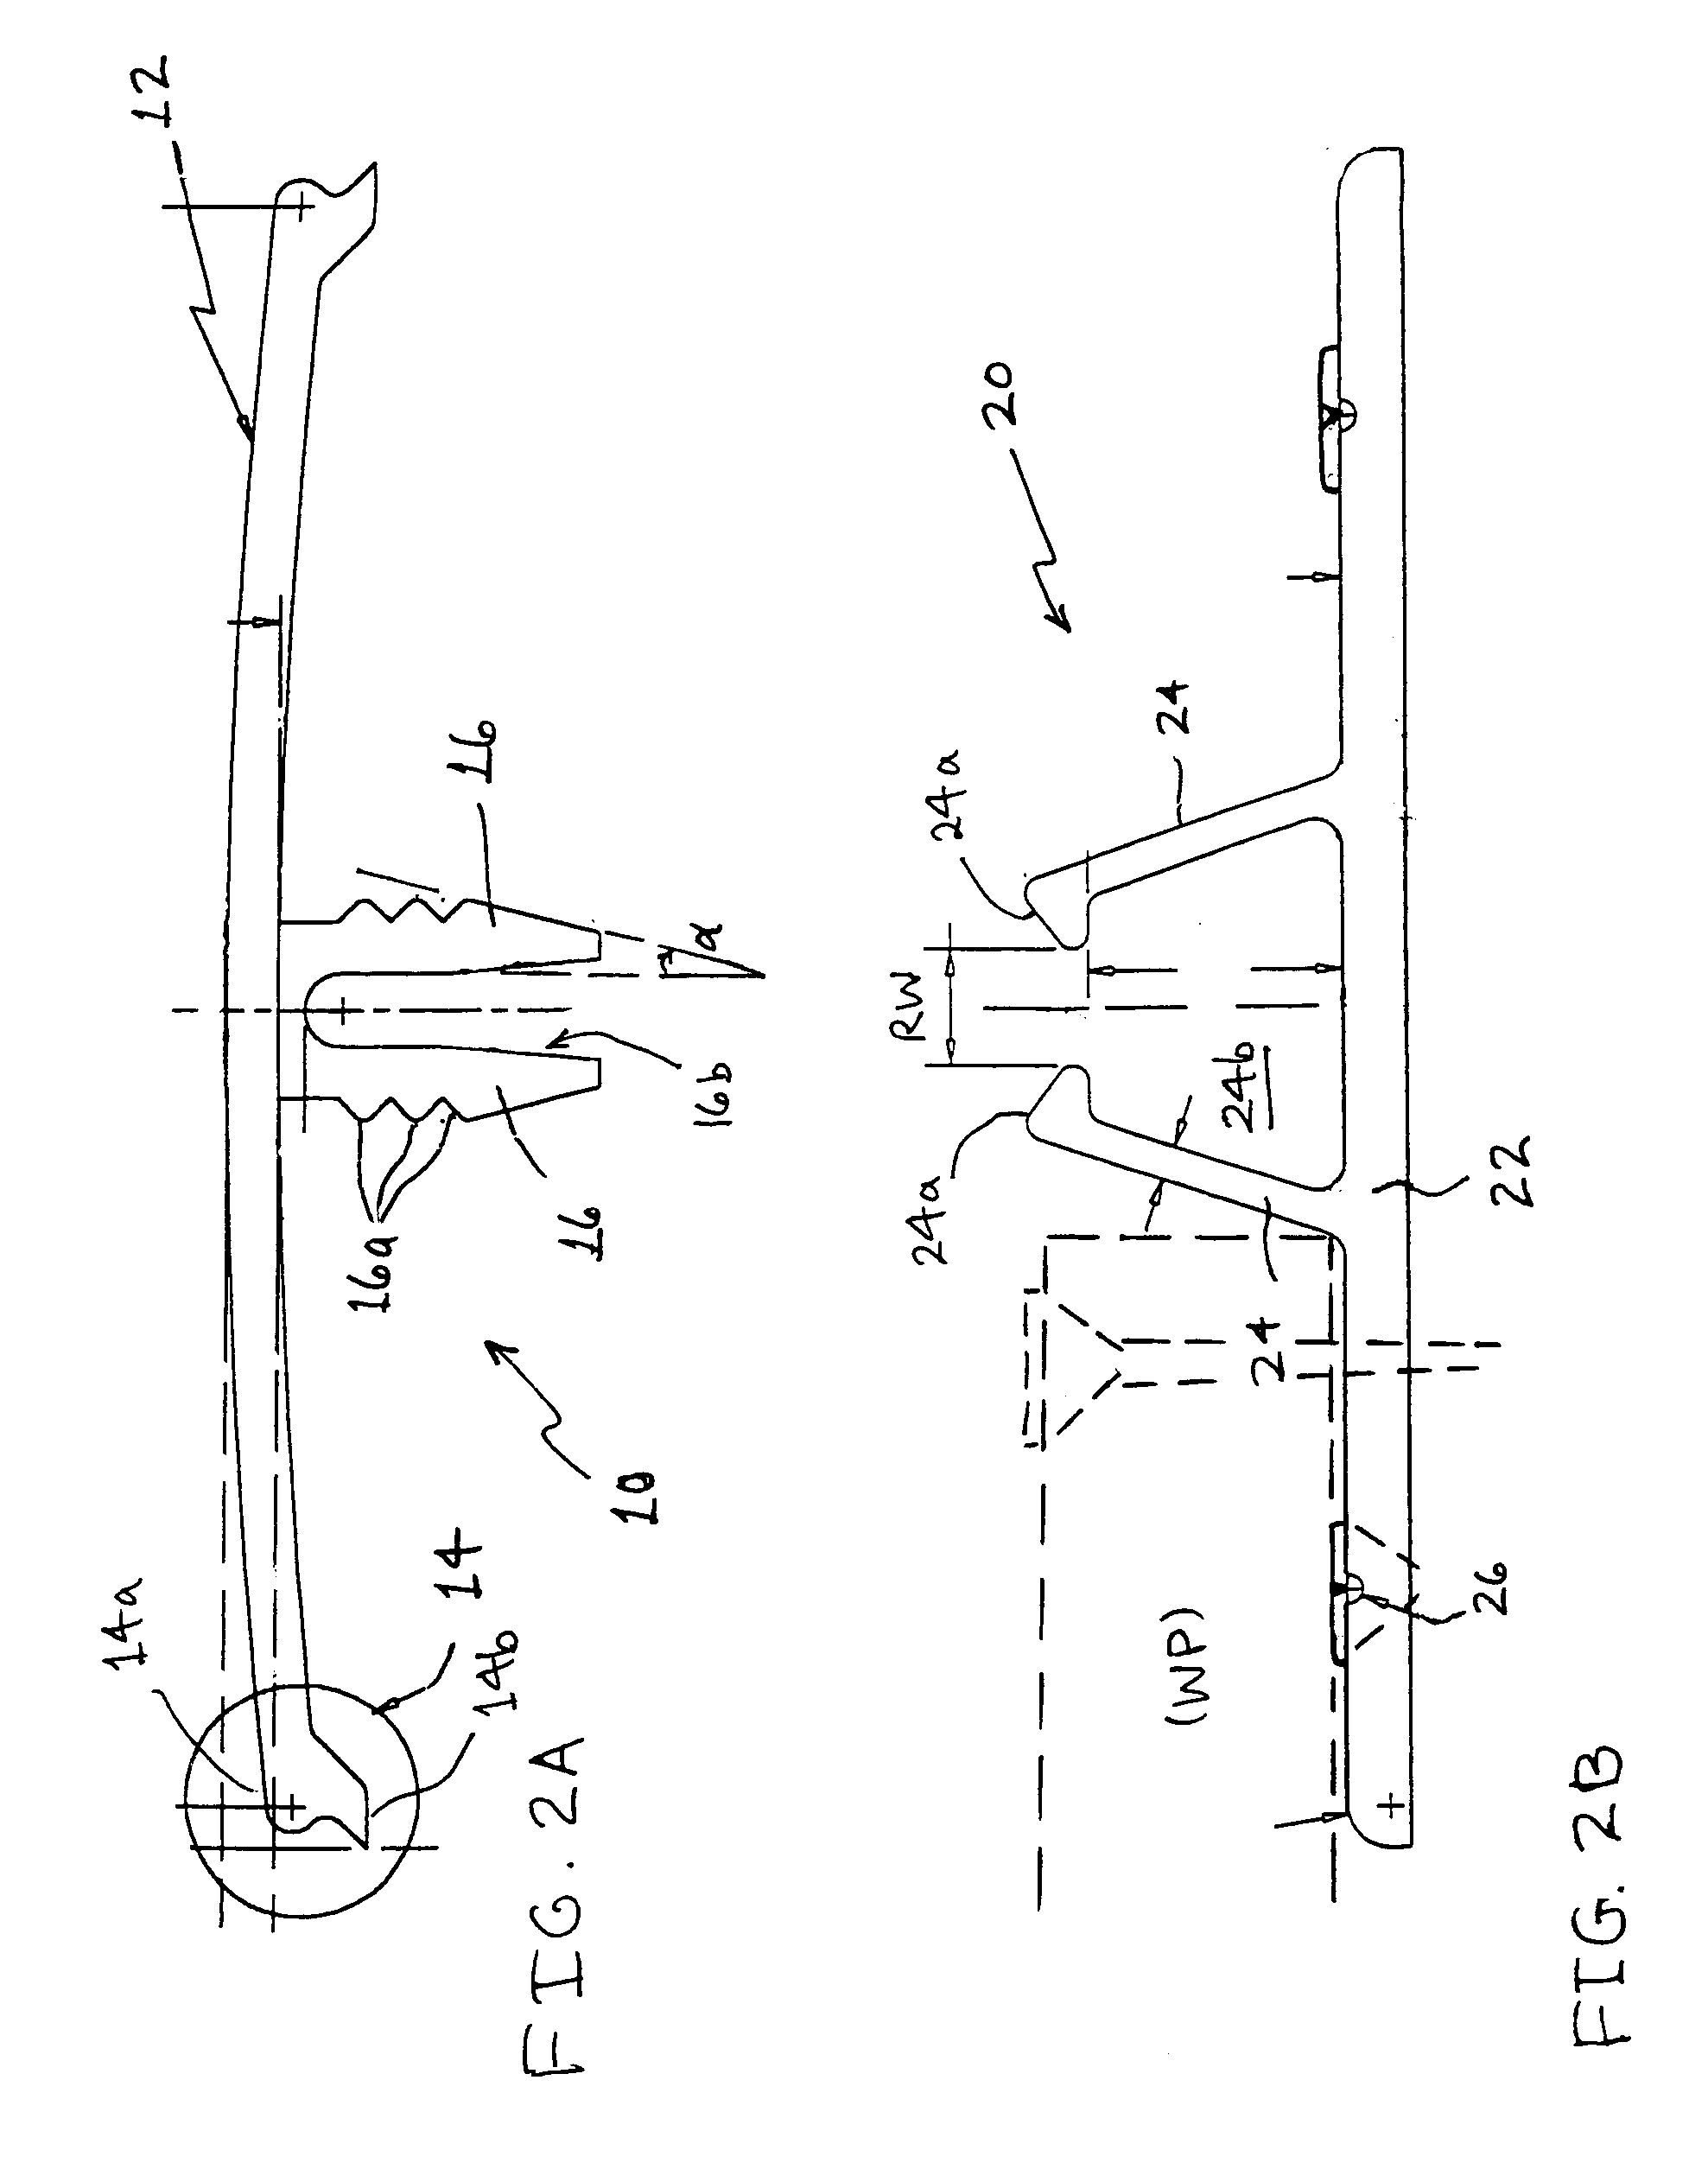 Extrusion devices for mounting wall panels